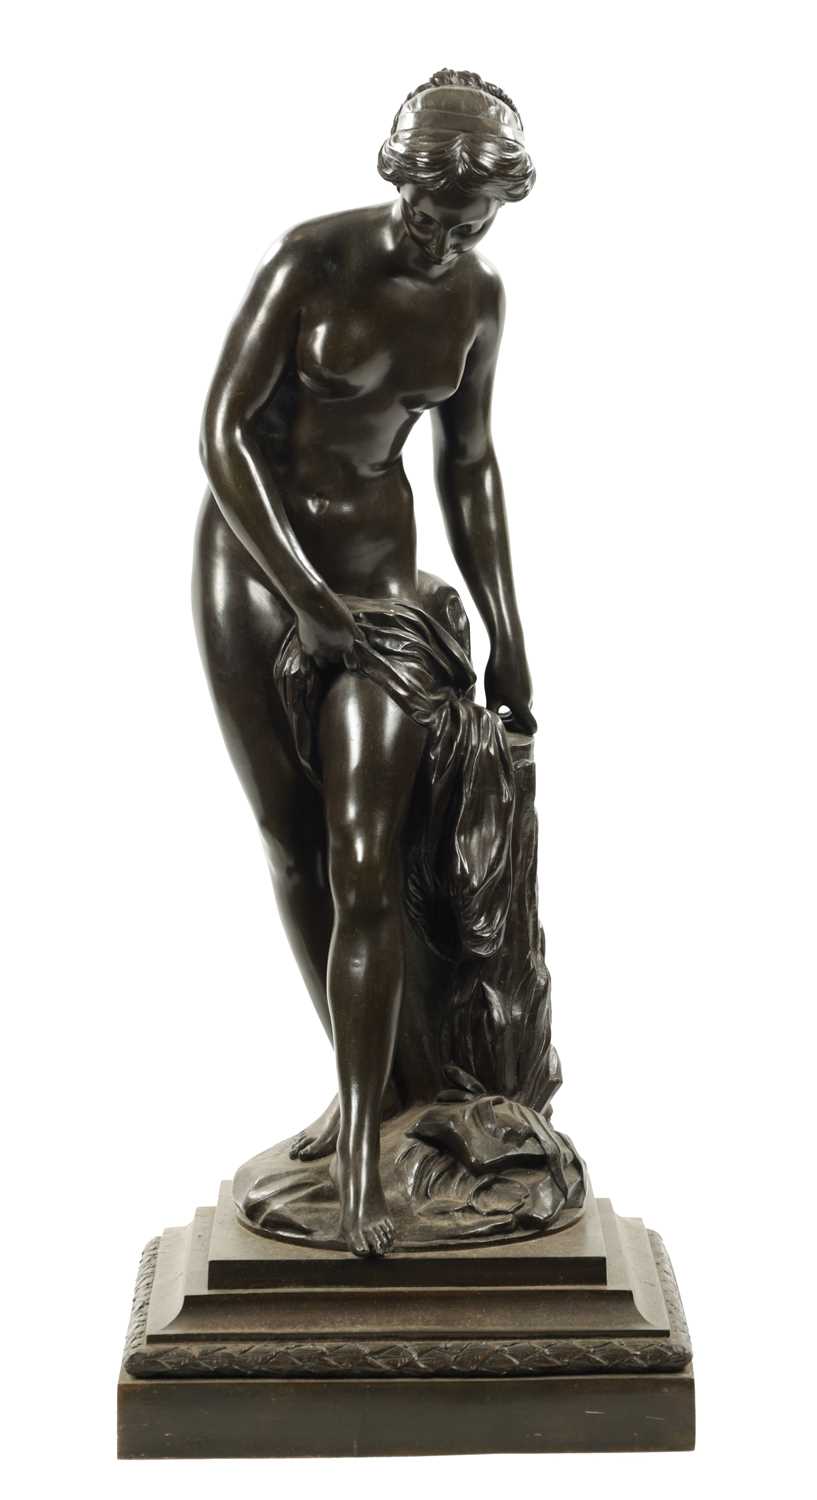 AFTER ETIENNE-MAURICE FALCONET. A LARGE LATE 19TH CENTURY PATINATED BRONZE SCULPTURE